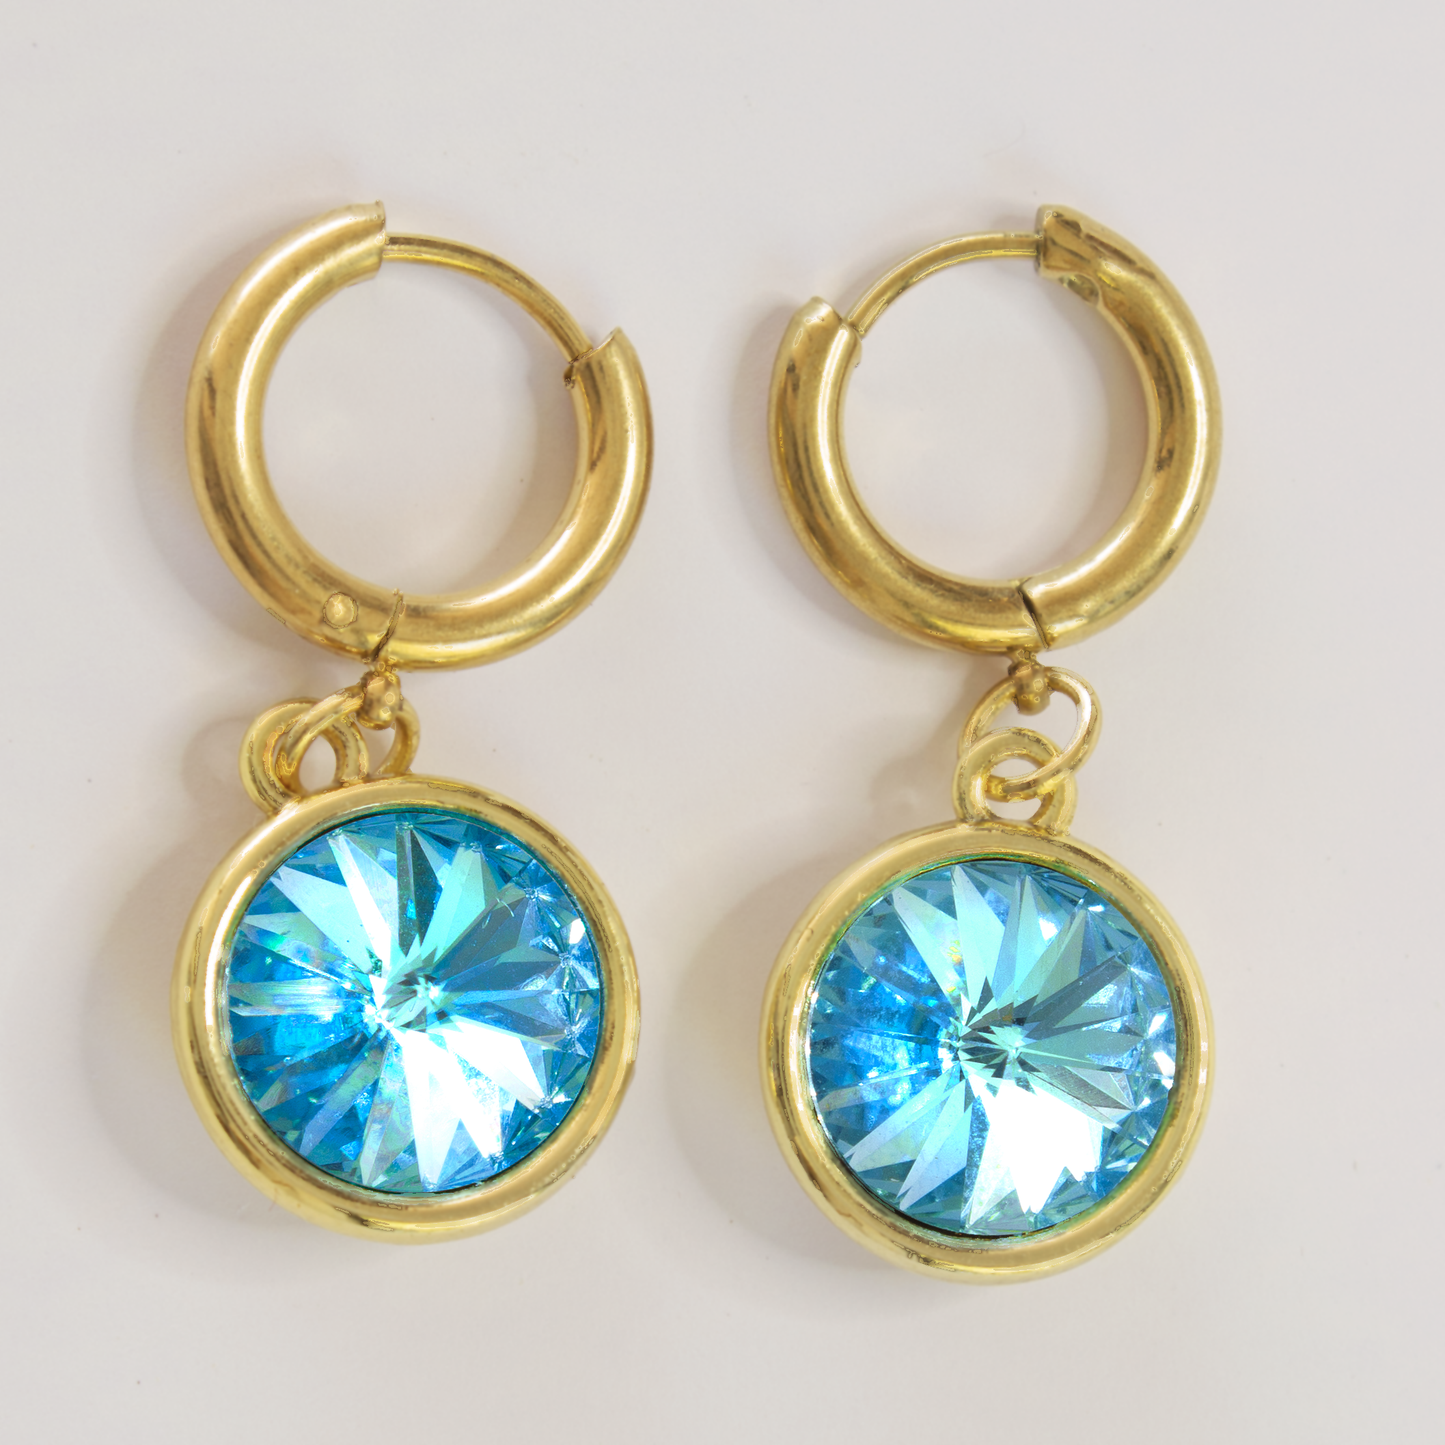 Austrian crystals huggie earring-2 colours: Turquoise and Sky Blue